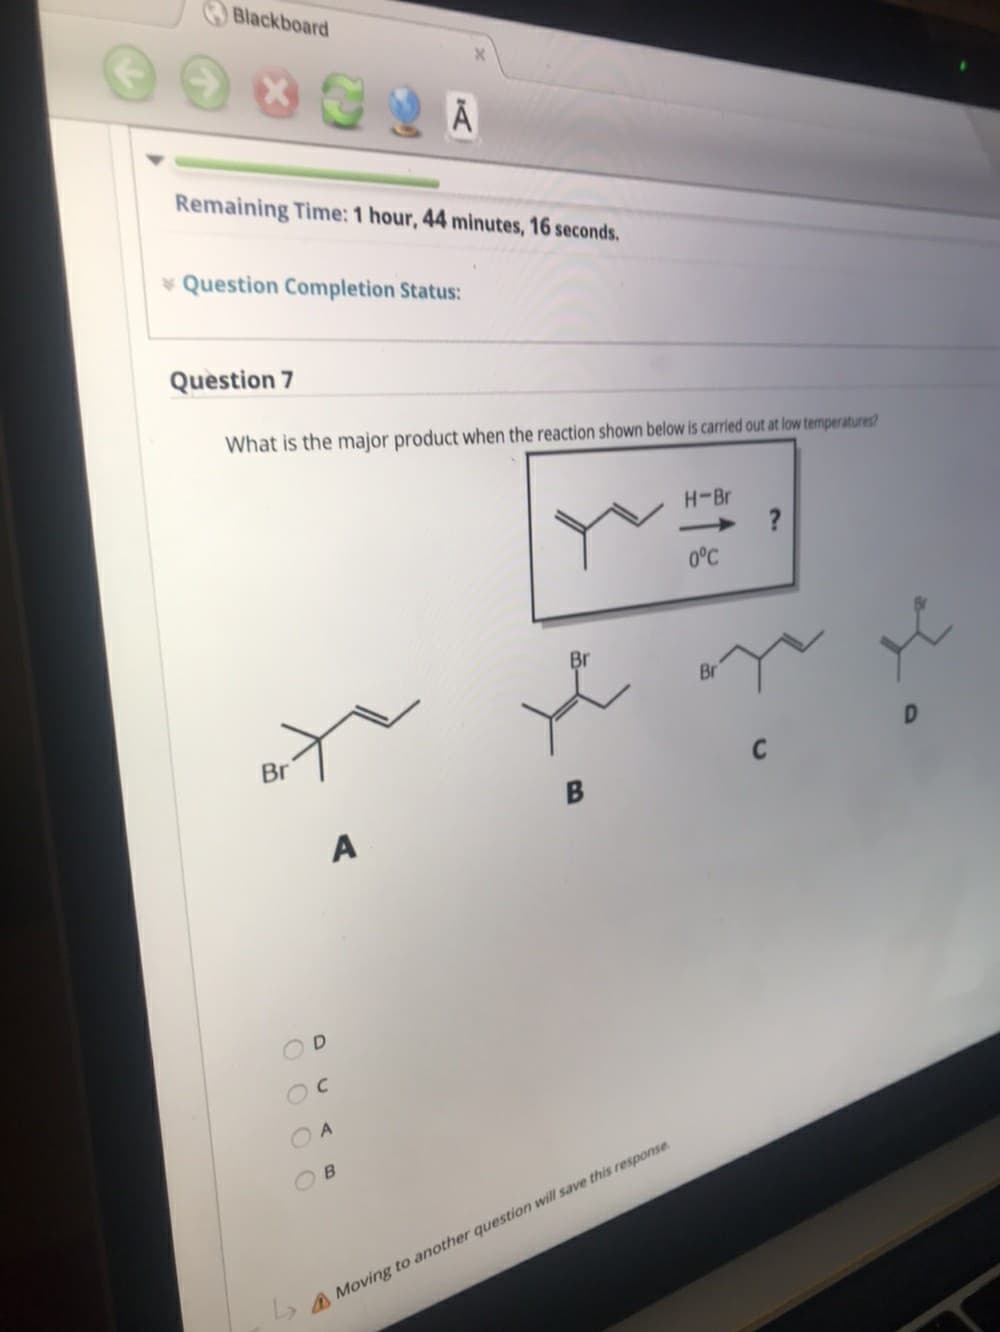 Blackboard
Remaining Time: 1 hour, 44 minutes, 16 seconds.
* Question Completion Status:
Question 7
What is the major product when the reaction shown below is carried out at low temperatures?
H-Br
>
0°C
Br
Br
Br
A
OB
A Moving to another question will save this response.
O OO O
